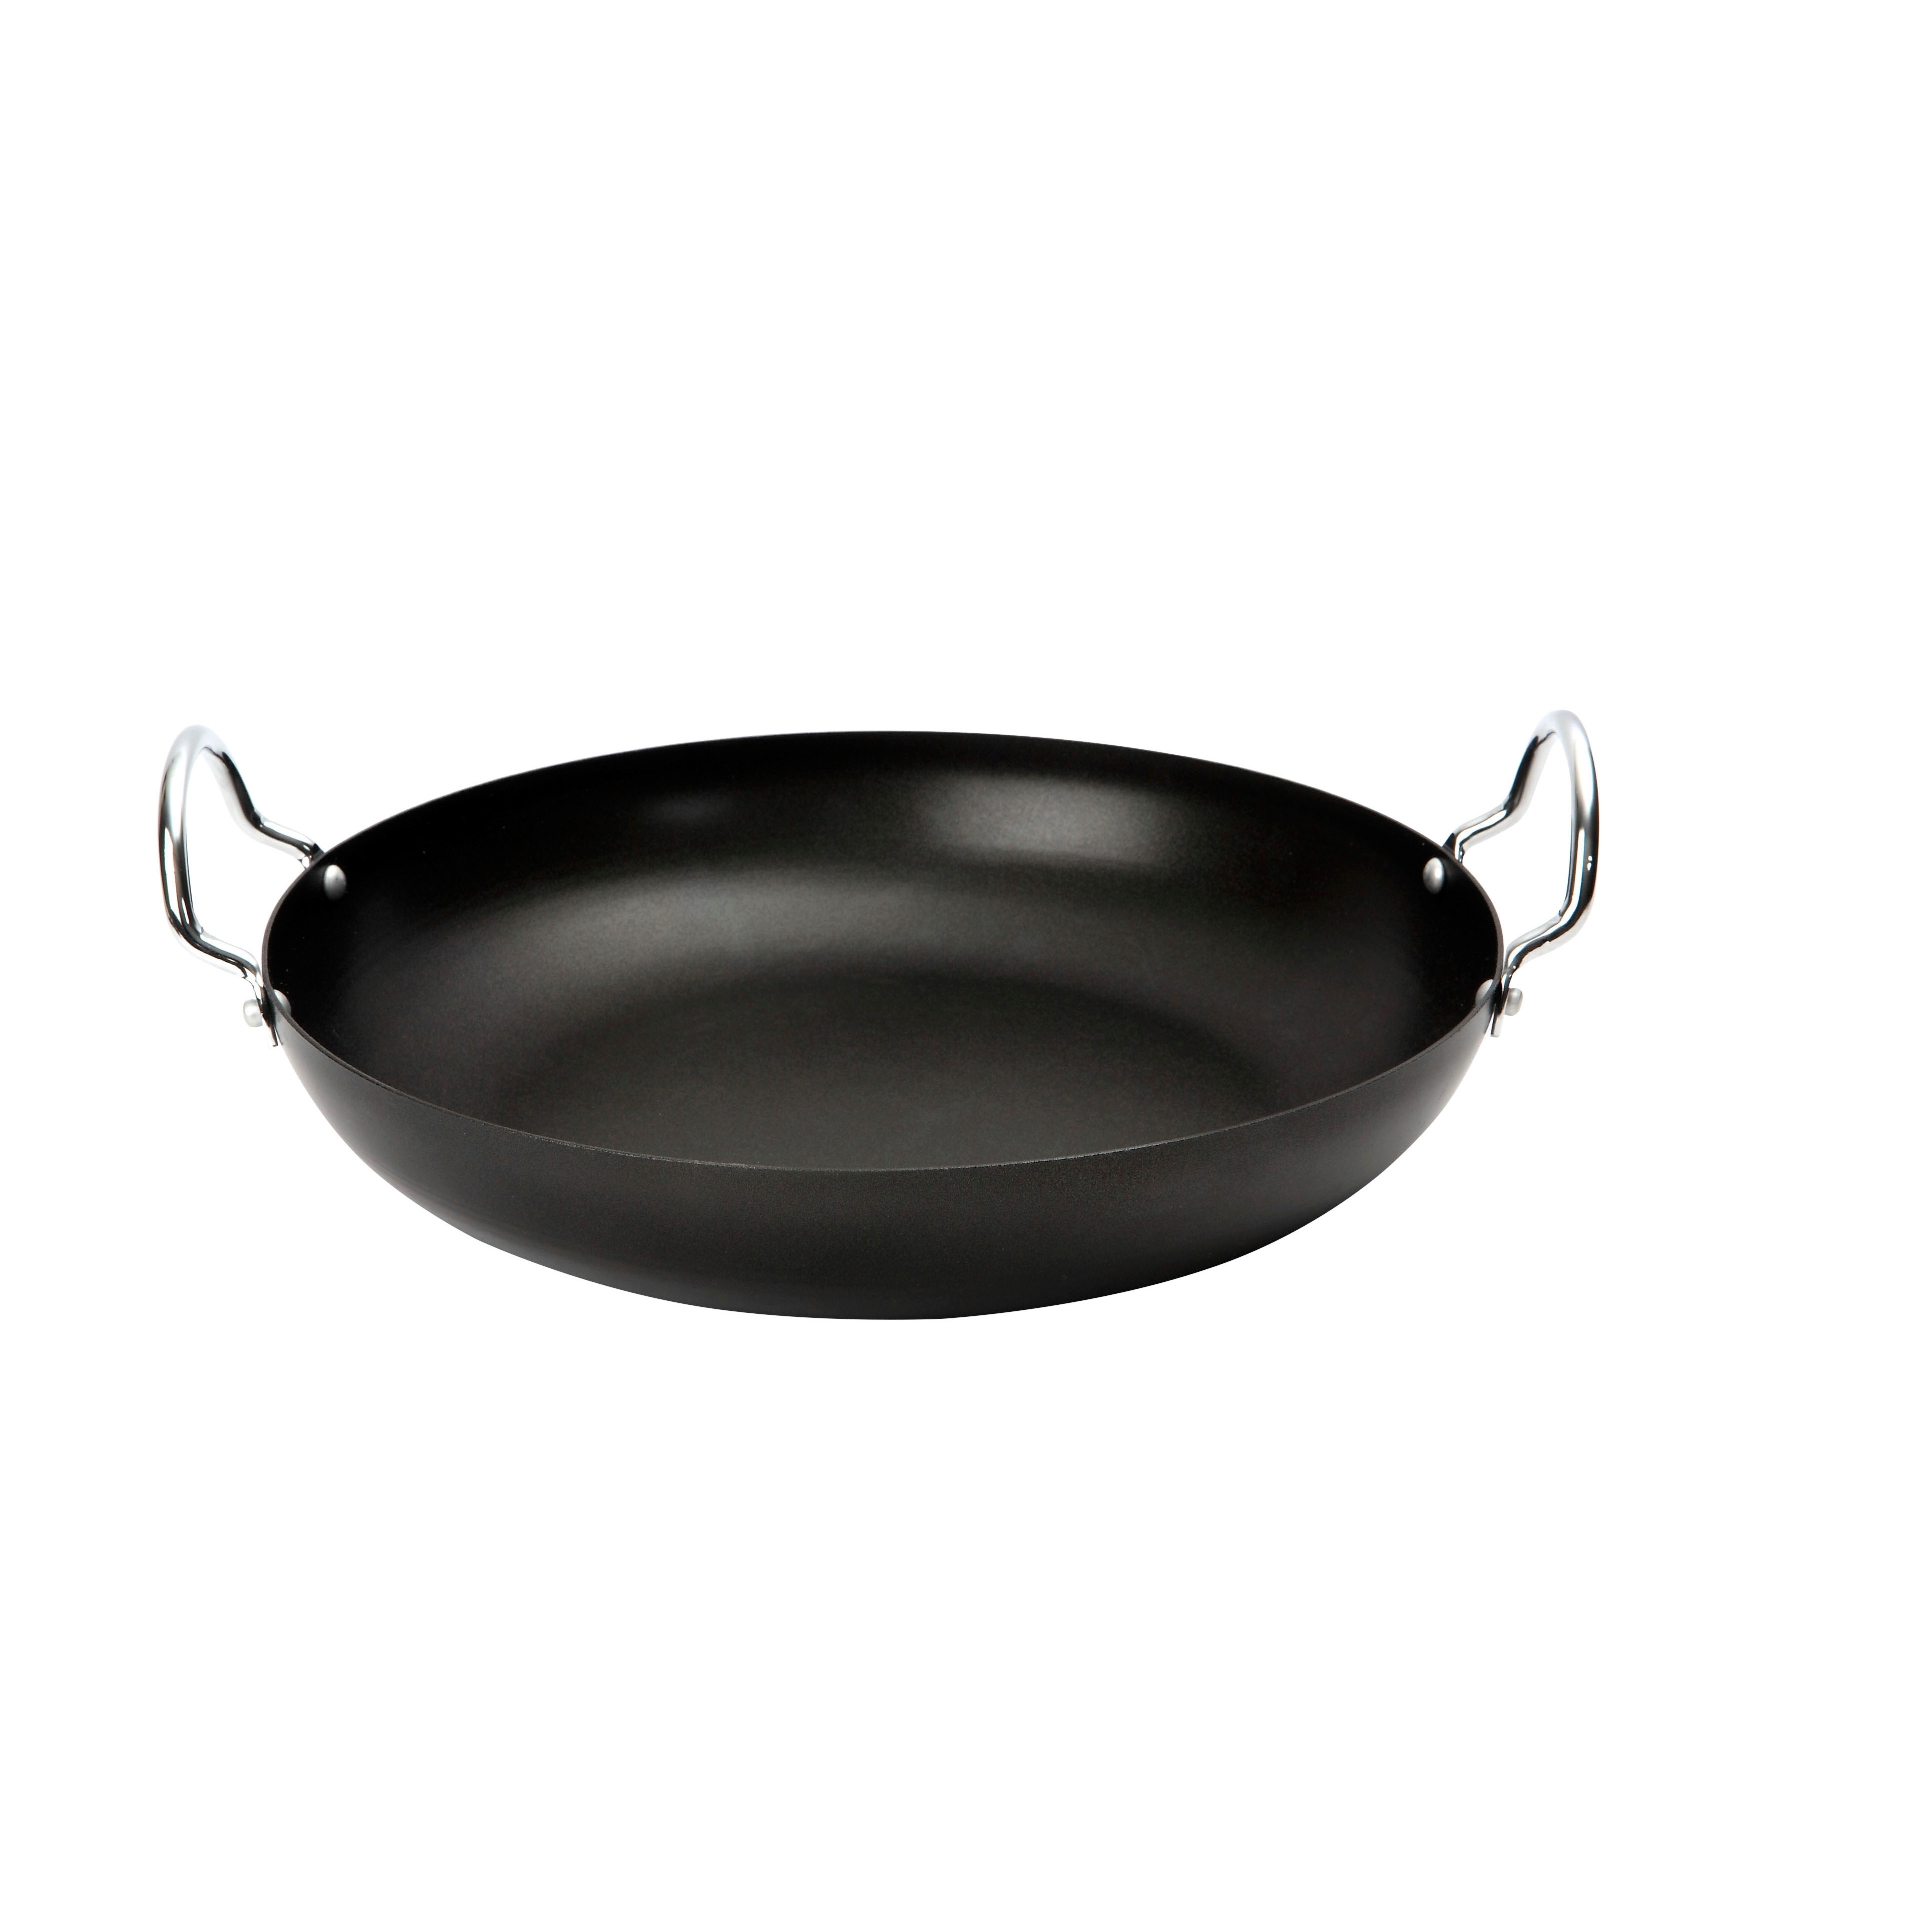 Chef's and Saute pans